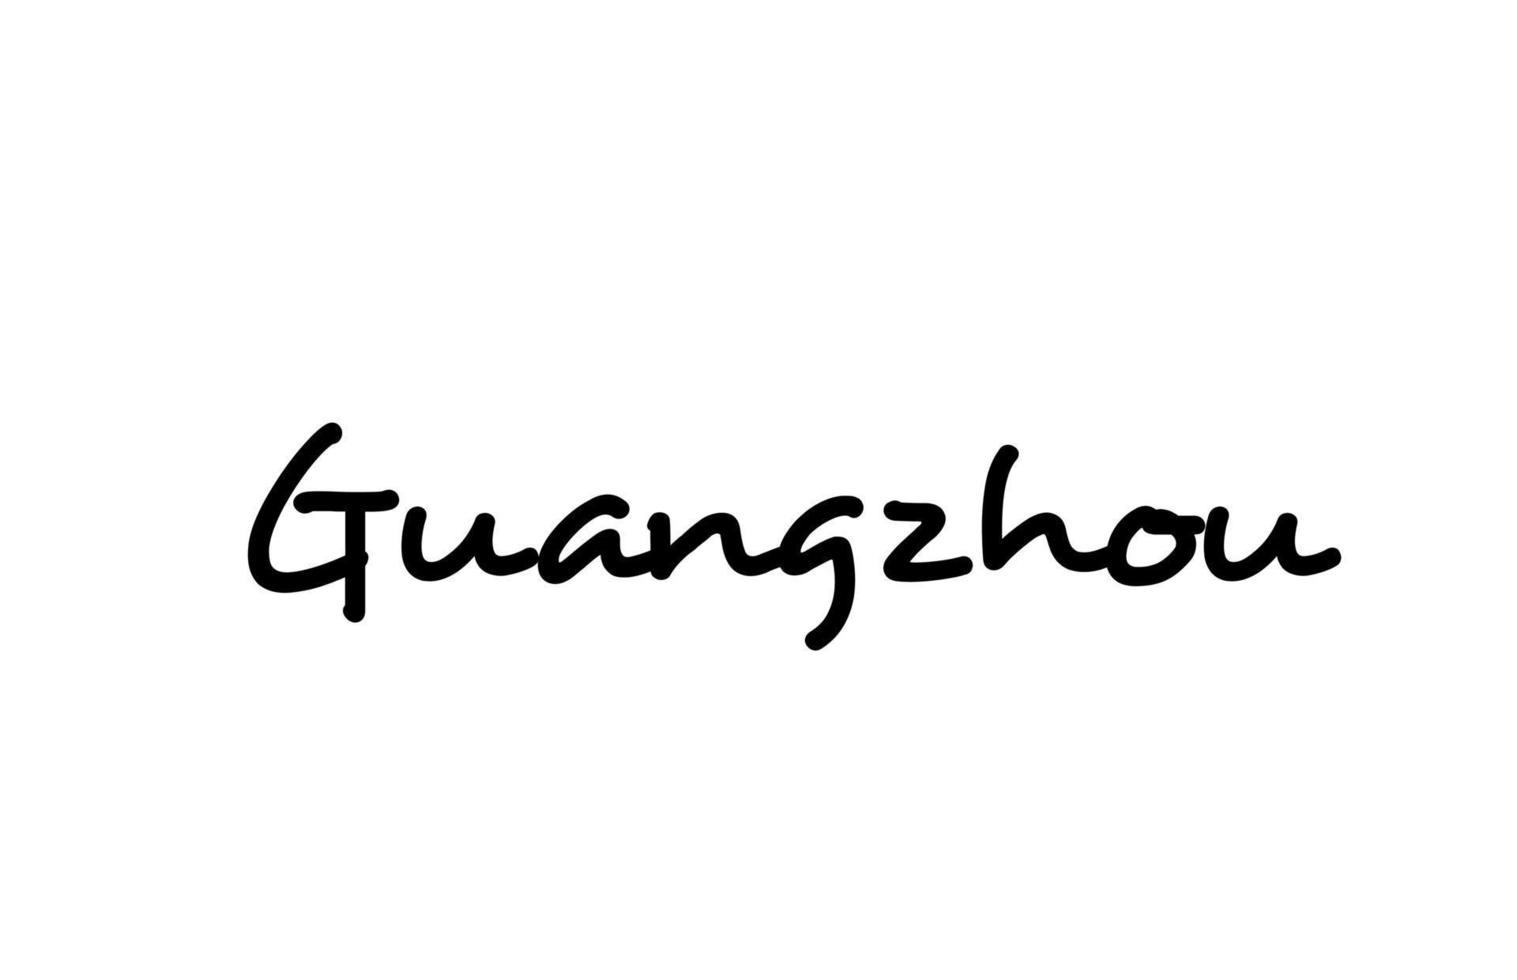 Guangzhou city handwritten word text hand lettering. Calligraphy text. Typography in black color vector